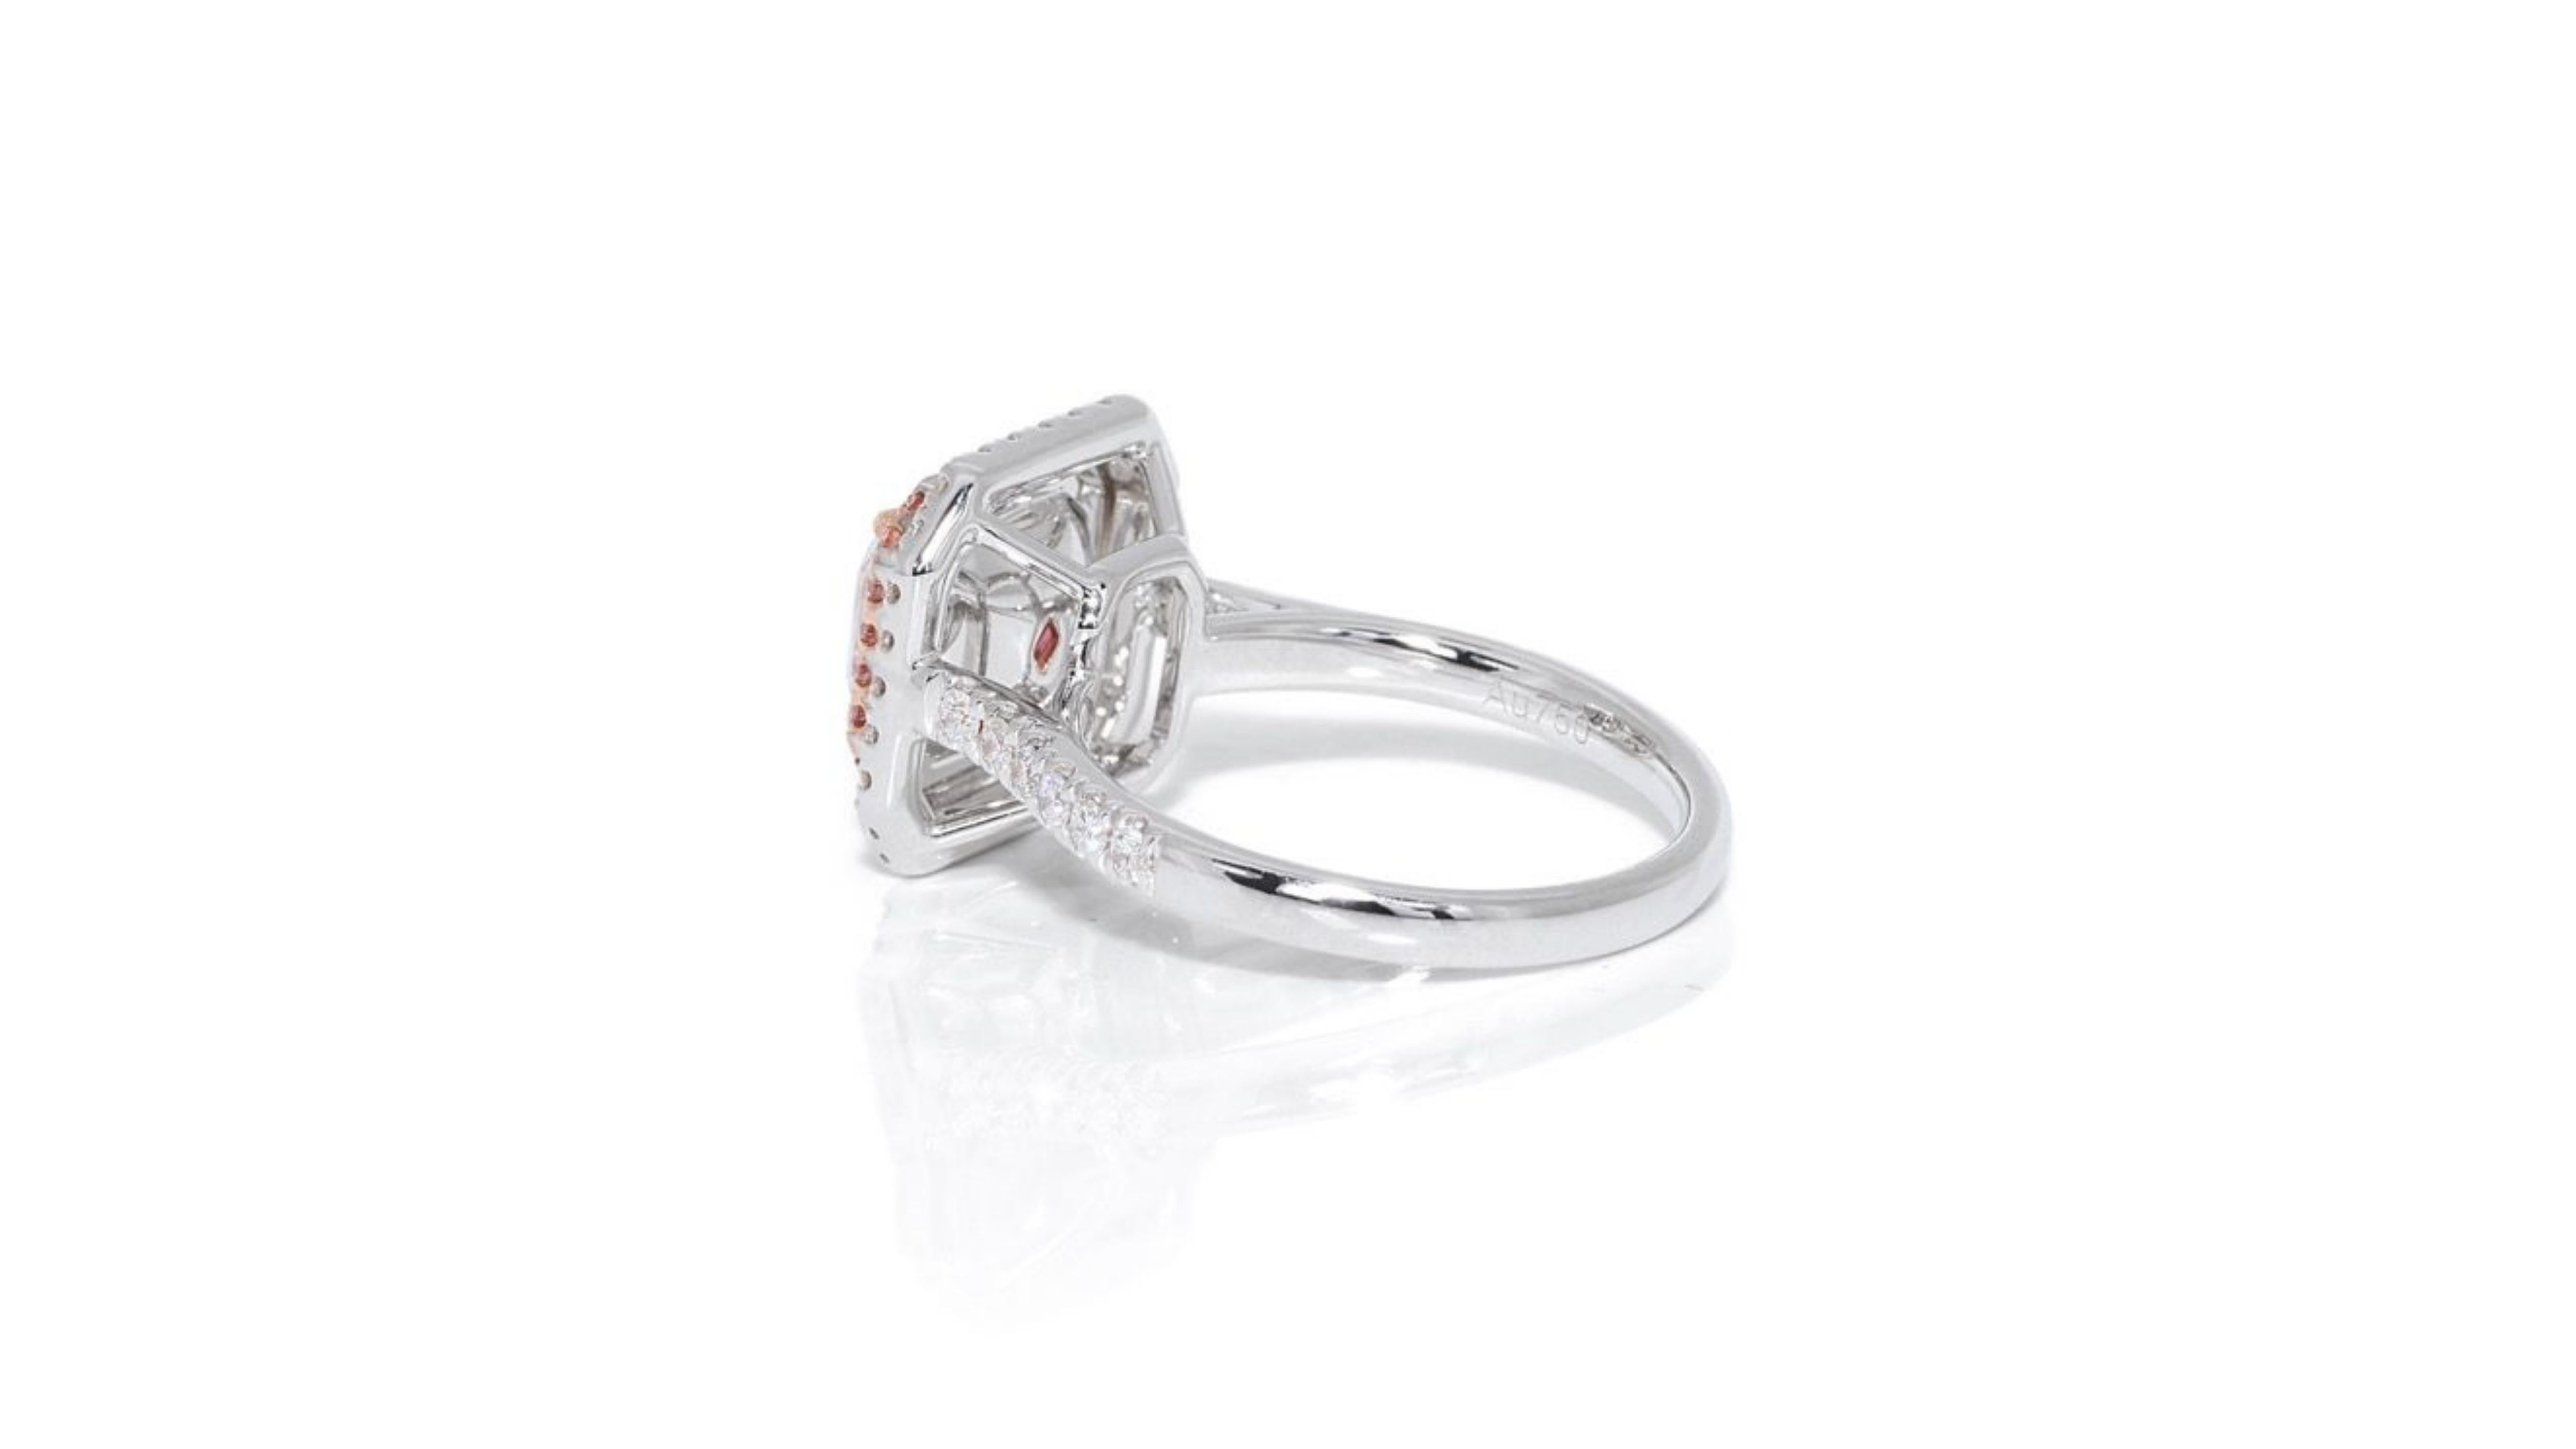 Women's Captivating 18k White Gold Ring 1.86ct. Square Radiant Halo Diamond Ring For Sale